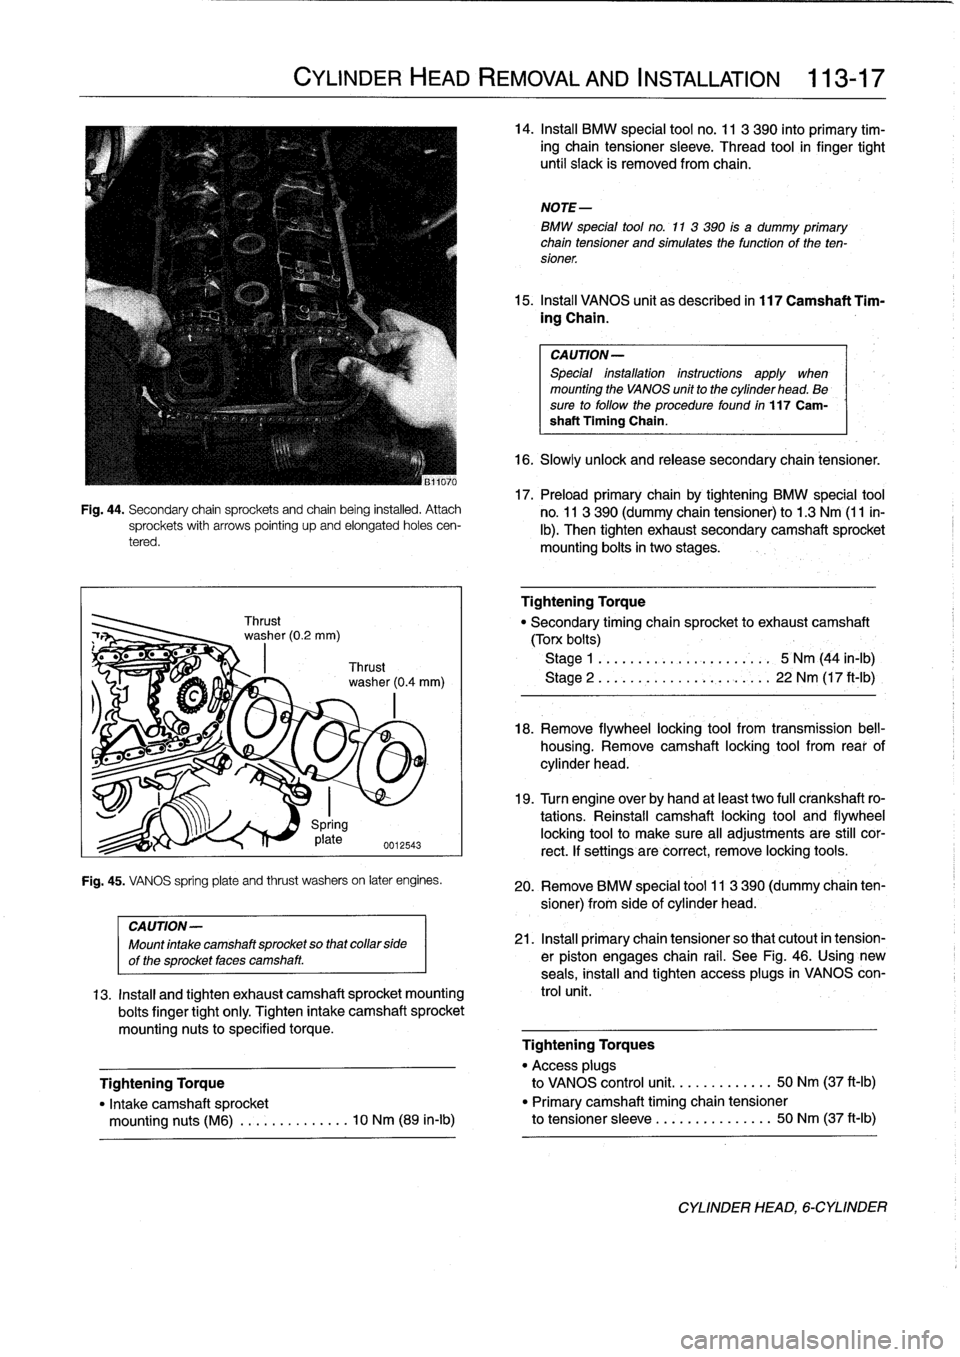 BMW 318i 1992 E36 Workshop Manual 
Fig
.
44
.
Secondary
chain
sprockets
and
chain
being
installed
.
Attachsprockets
with
arrows
pointing
upand
elongated
holes
cen-
tered
.

CYLINDER
HEAD
REMOVAL
AND
INSTALLATION

	

113-17

Spring
17
